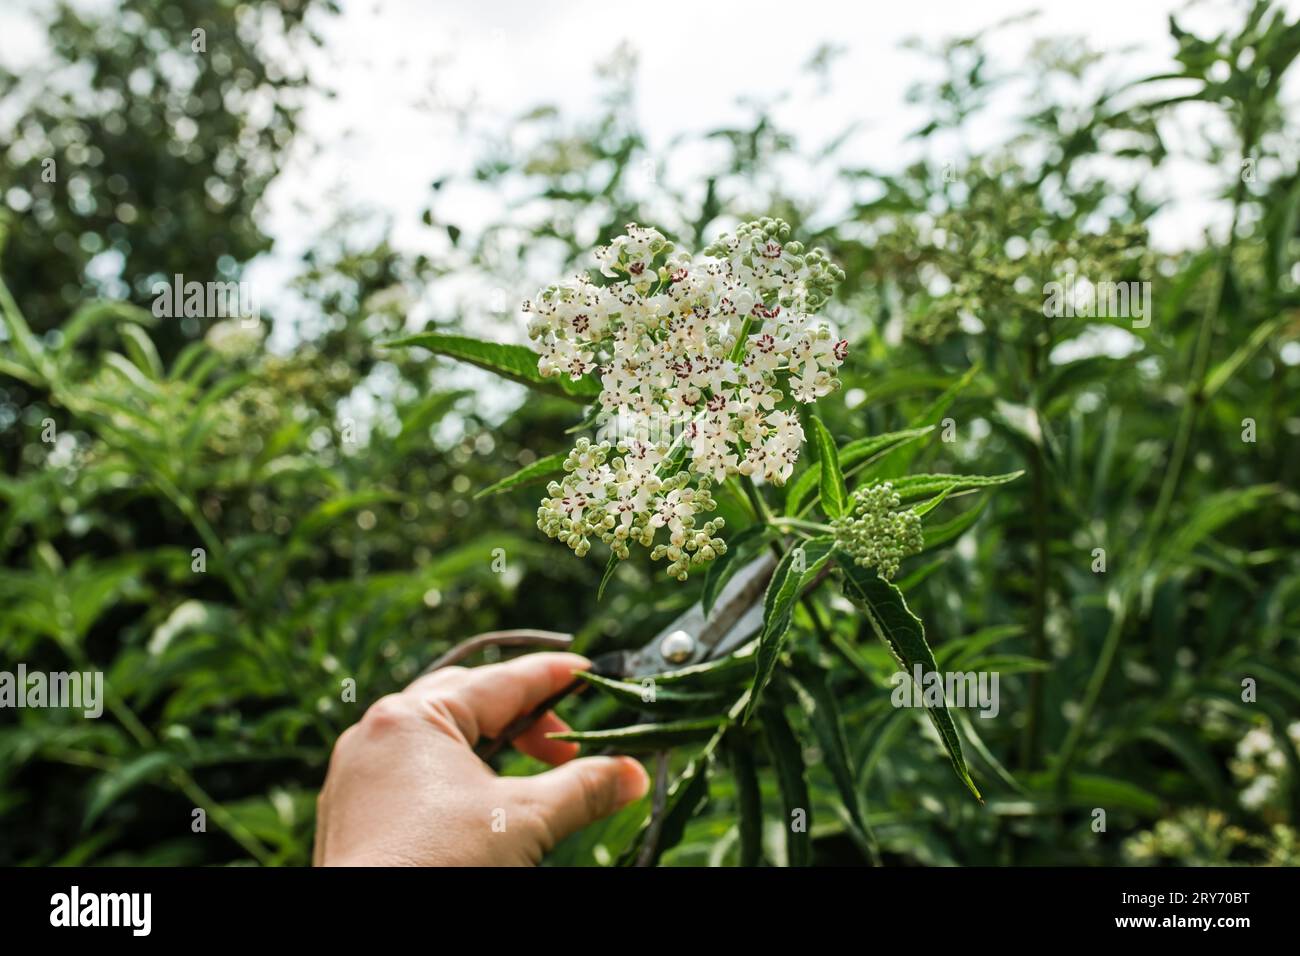 Hand pruning inflorescence fresh plant valerian flowers Valeriana officinalis with berries. garden valerian, garden heliotrope and all-heal flowers in Stock Photo